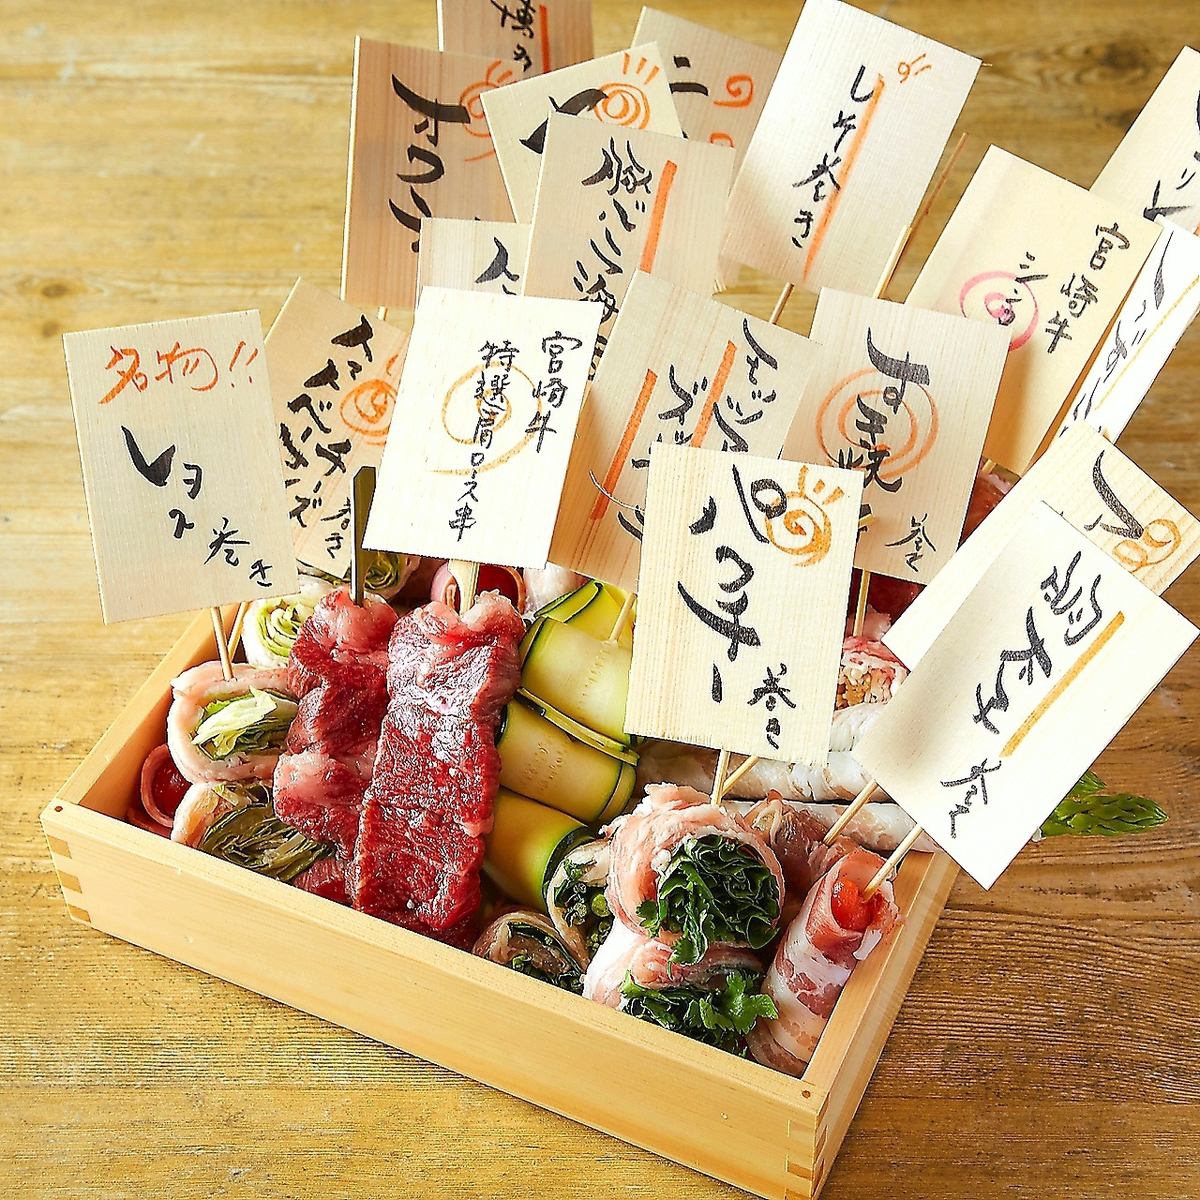 ◆ Specialty vegetable-wrapped skewers ◆ Toast with yakitori and beer tonight!